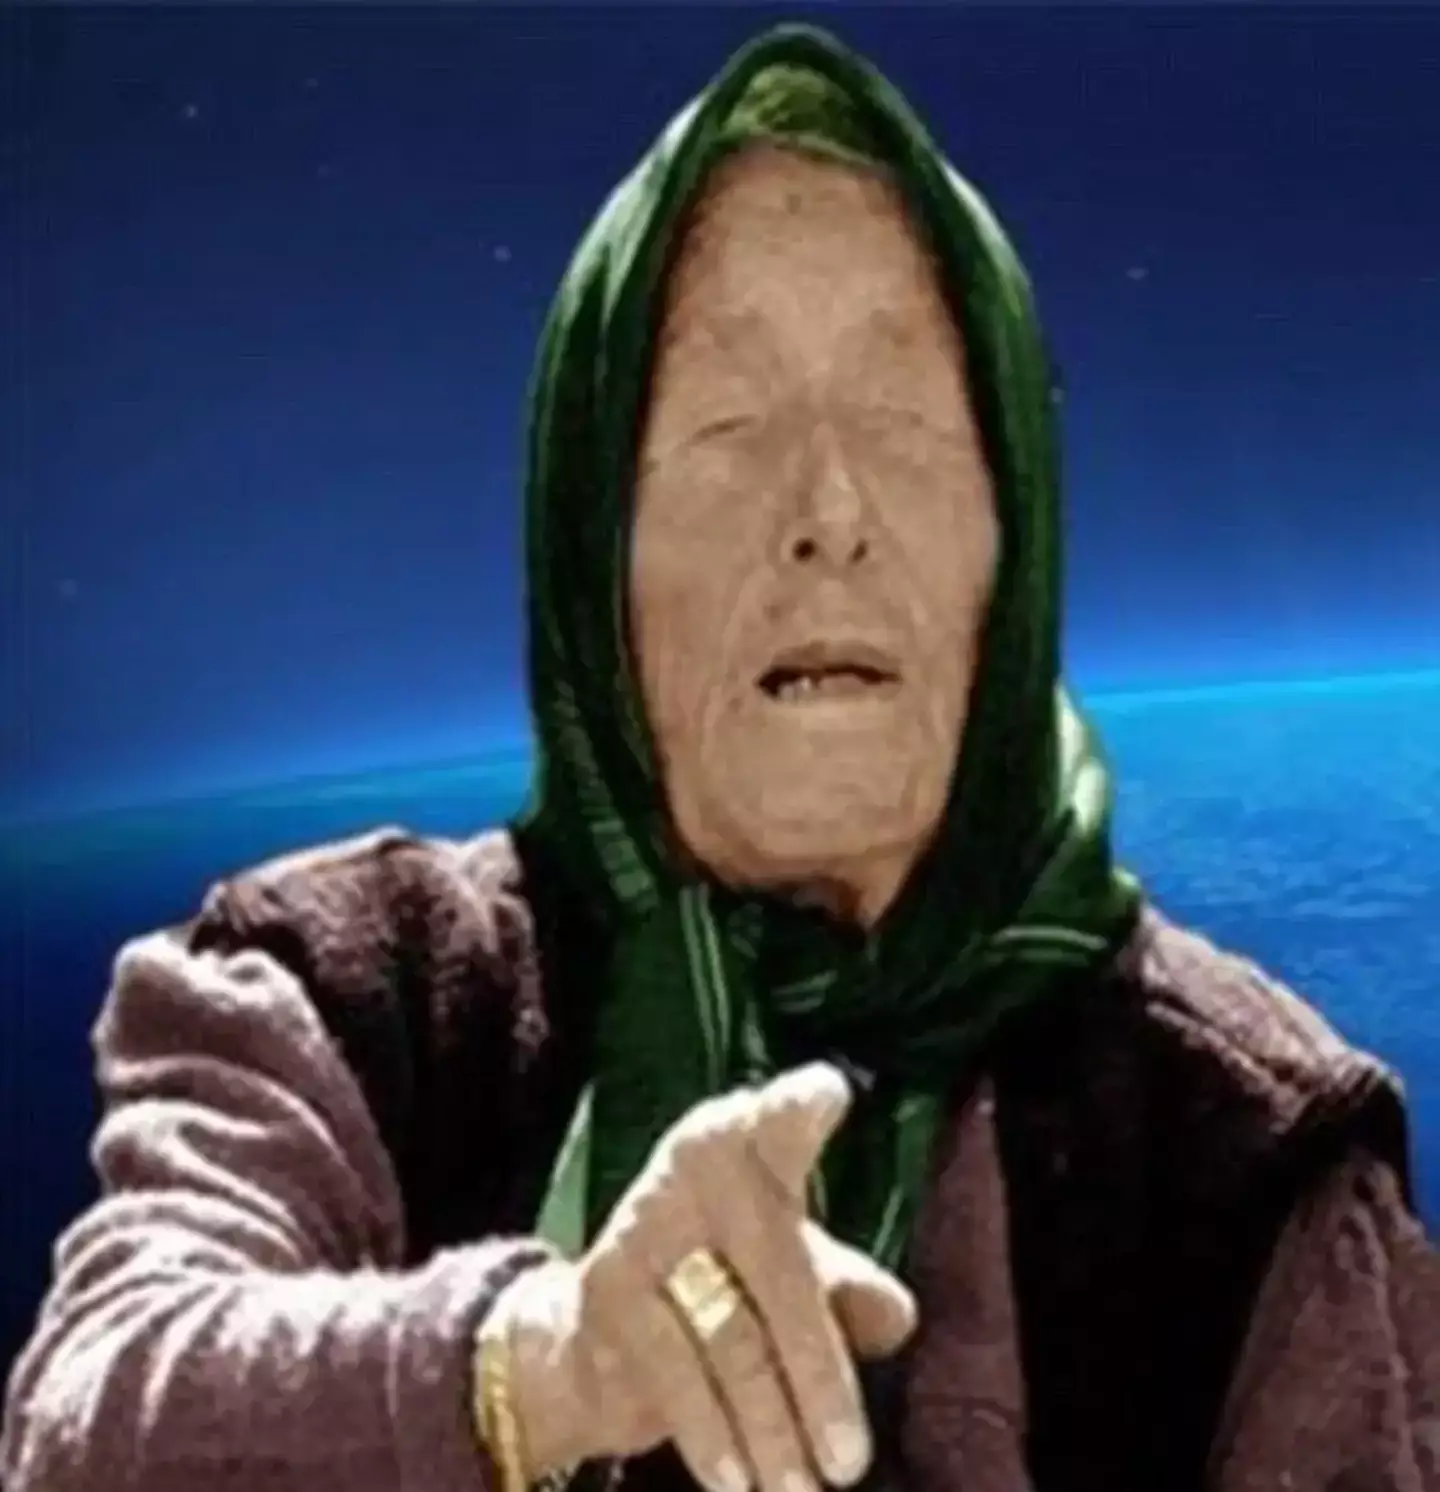 Baba Vanga died decades ago, but her predictions still make headlines.